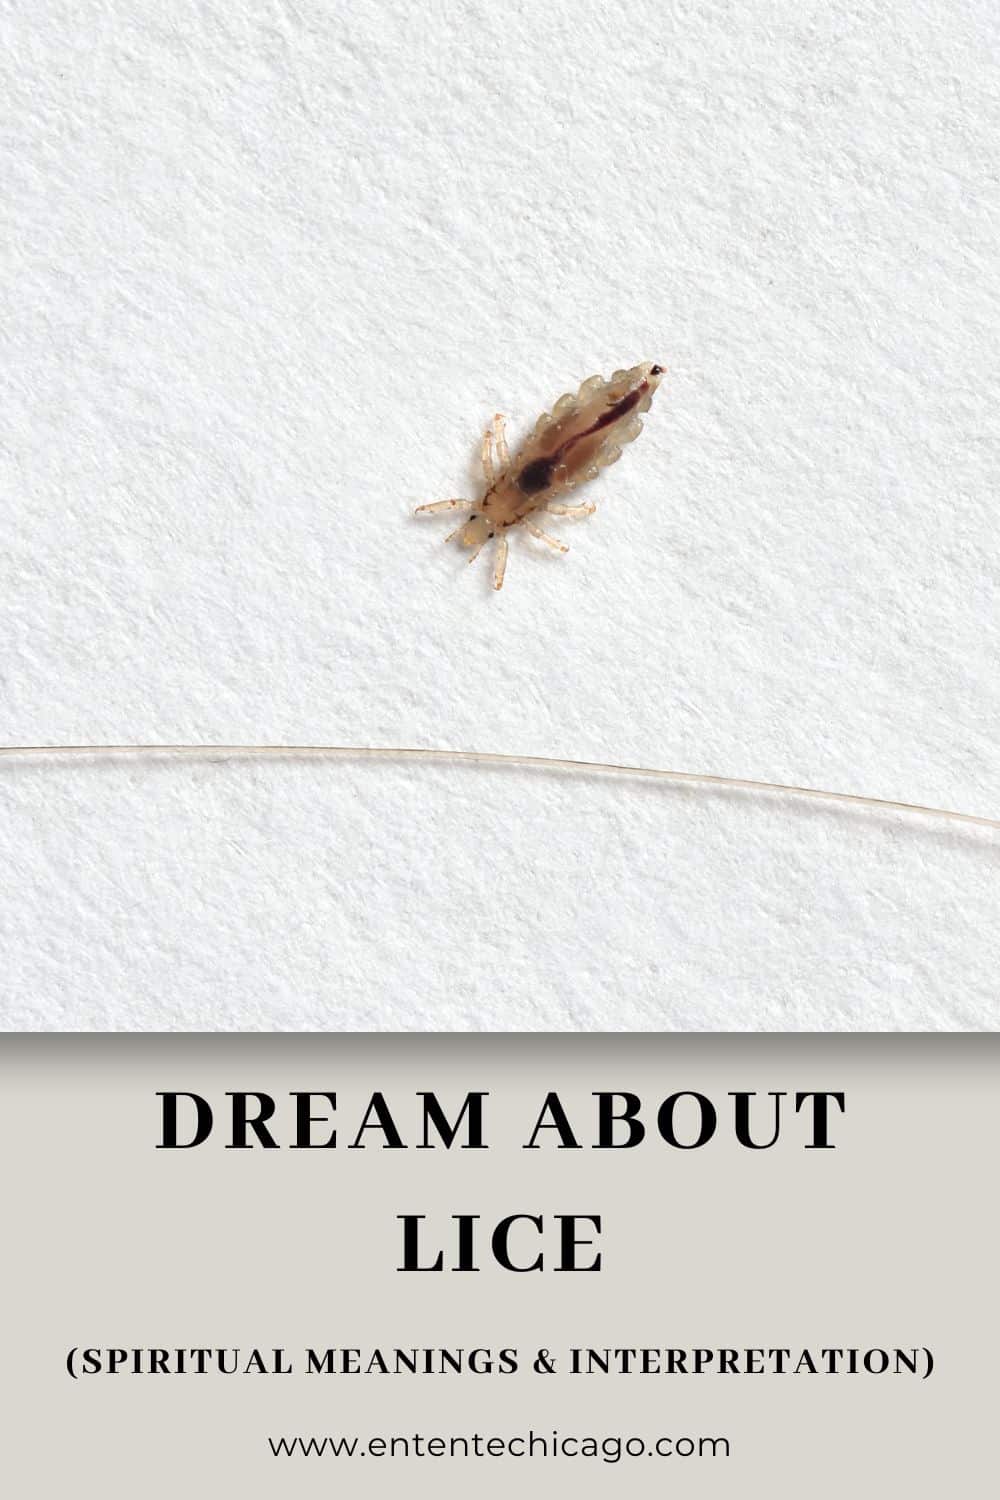 Why Do You Dream About Lice